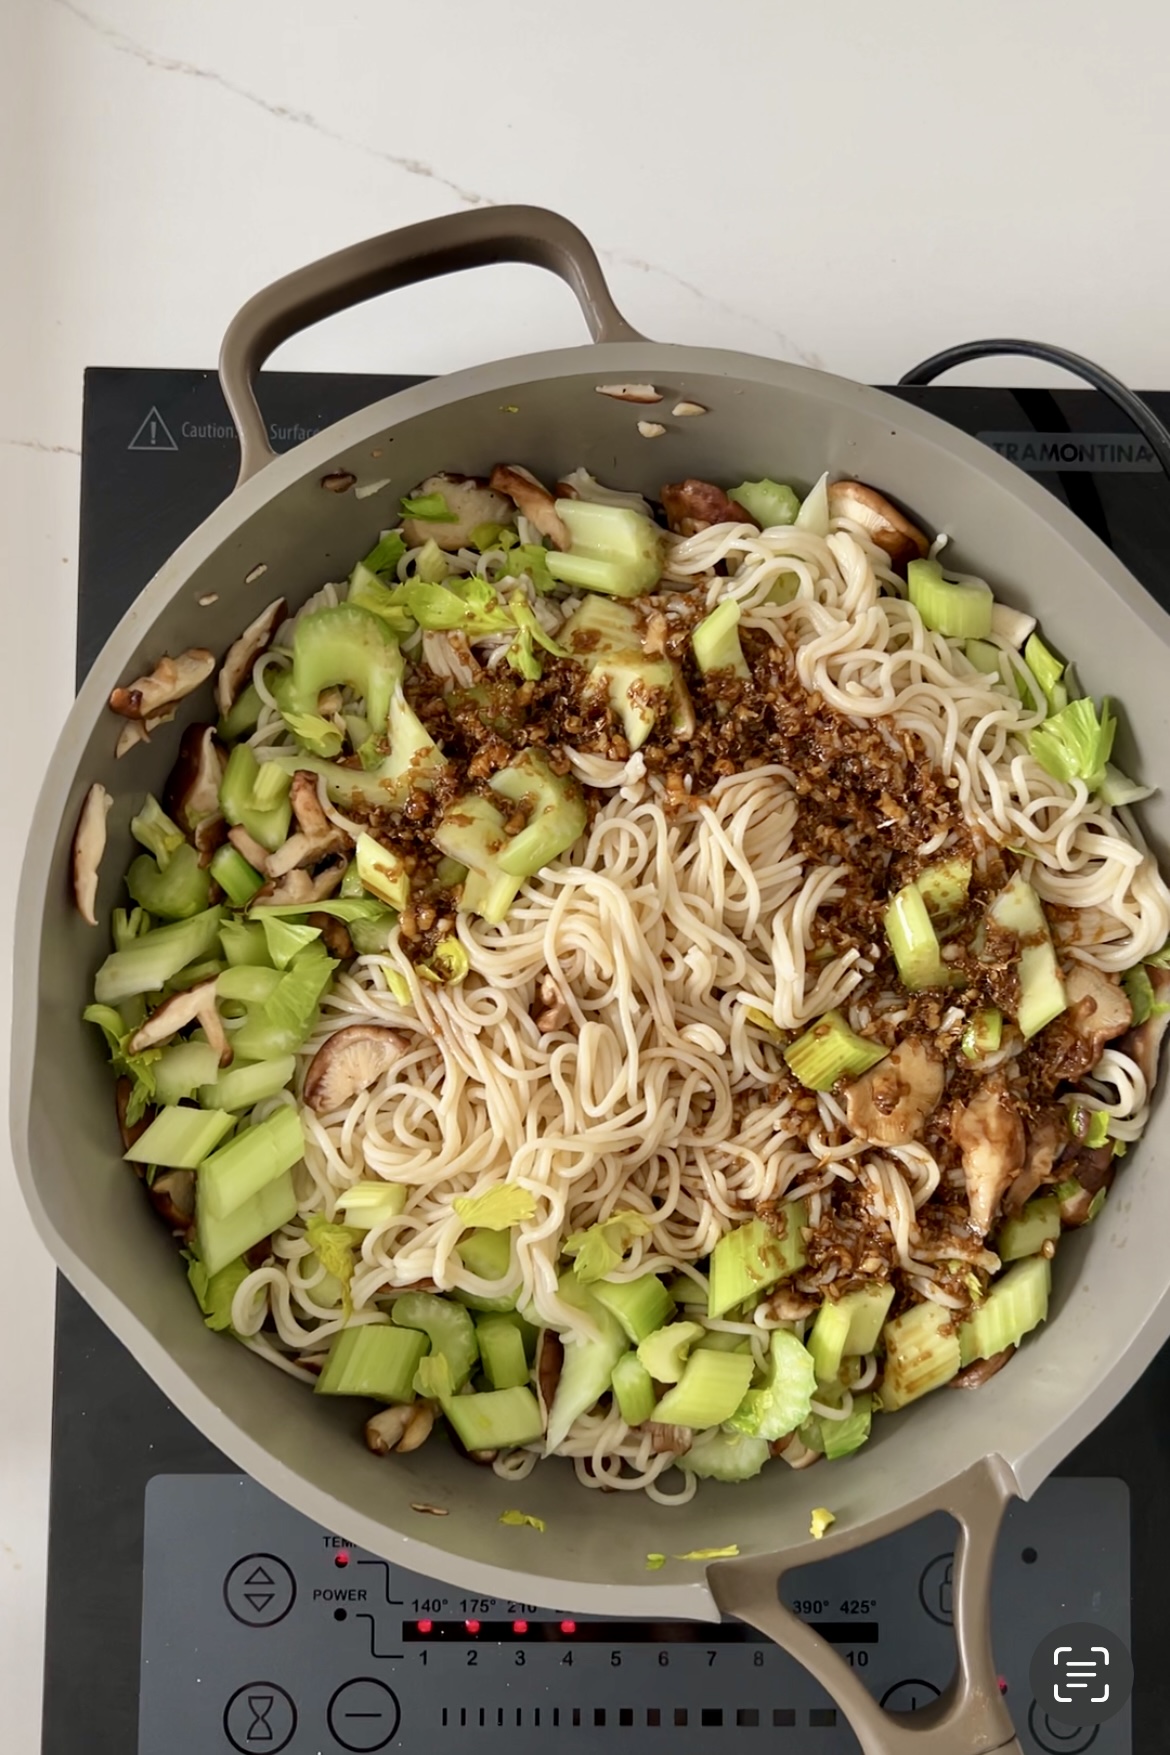 A pan full of stir-fry noodles and vegetables on top of a stove, sprinkled with black pepper.